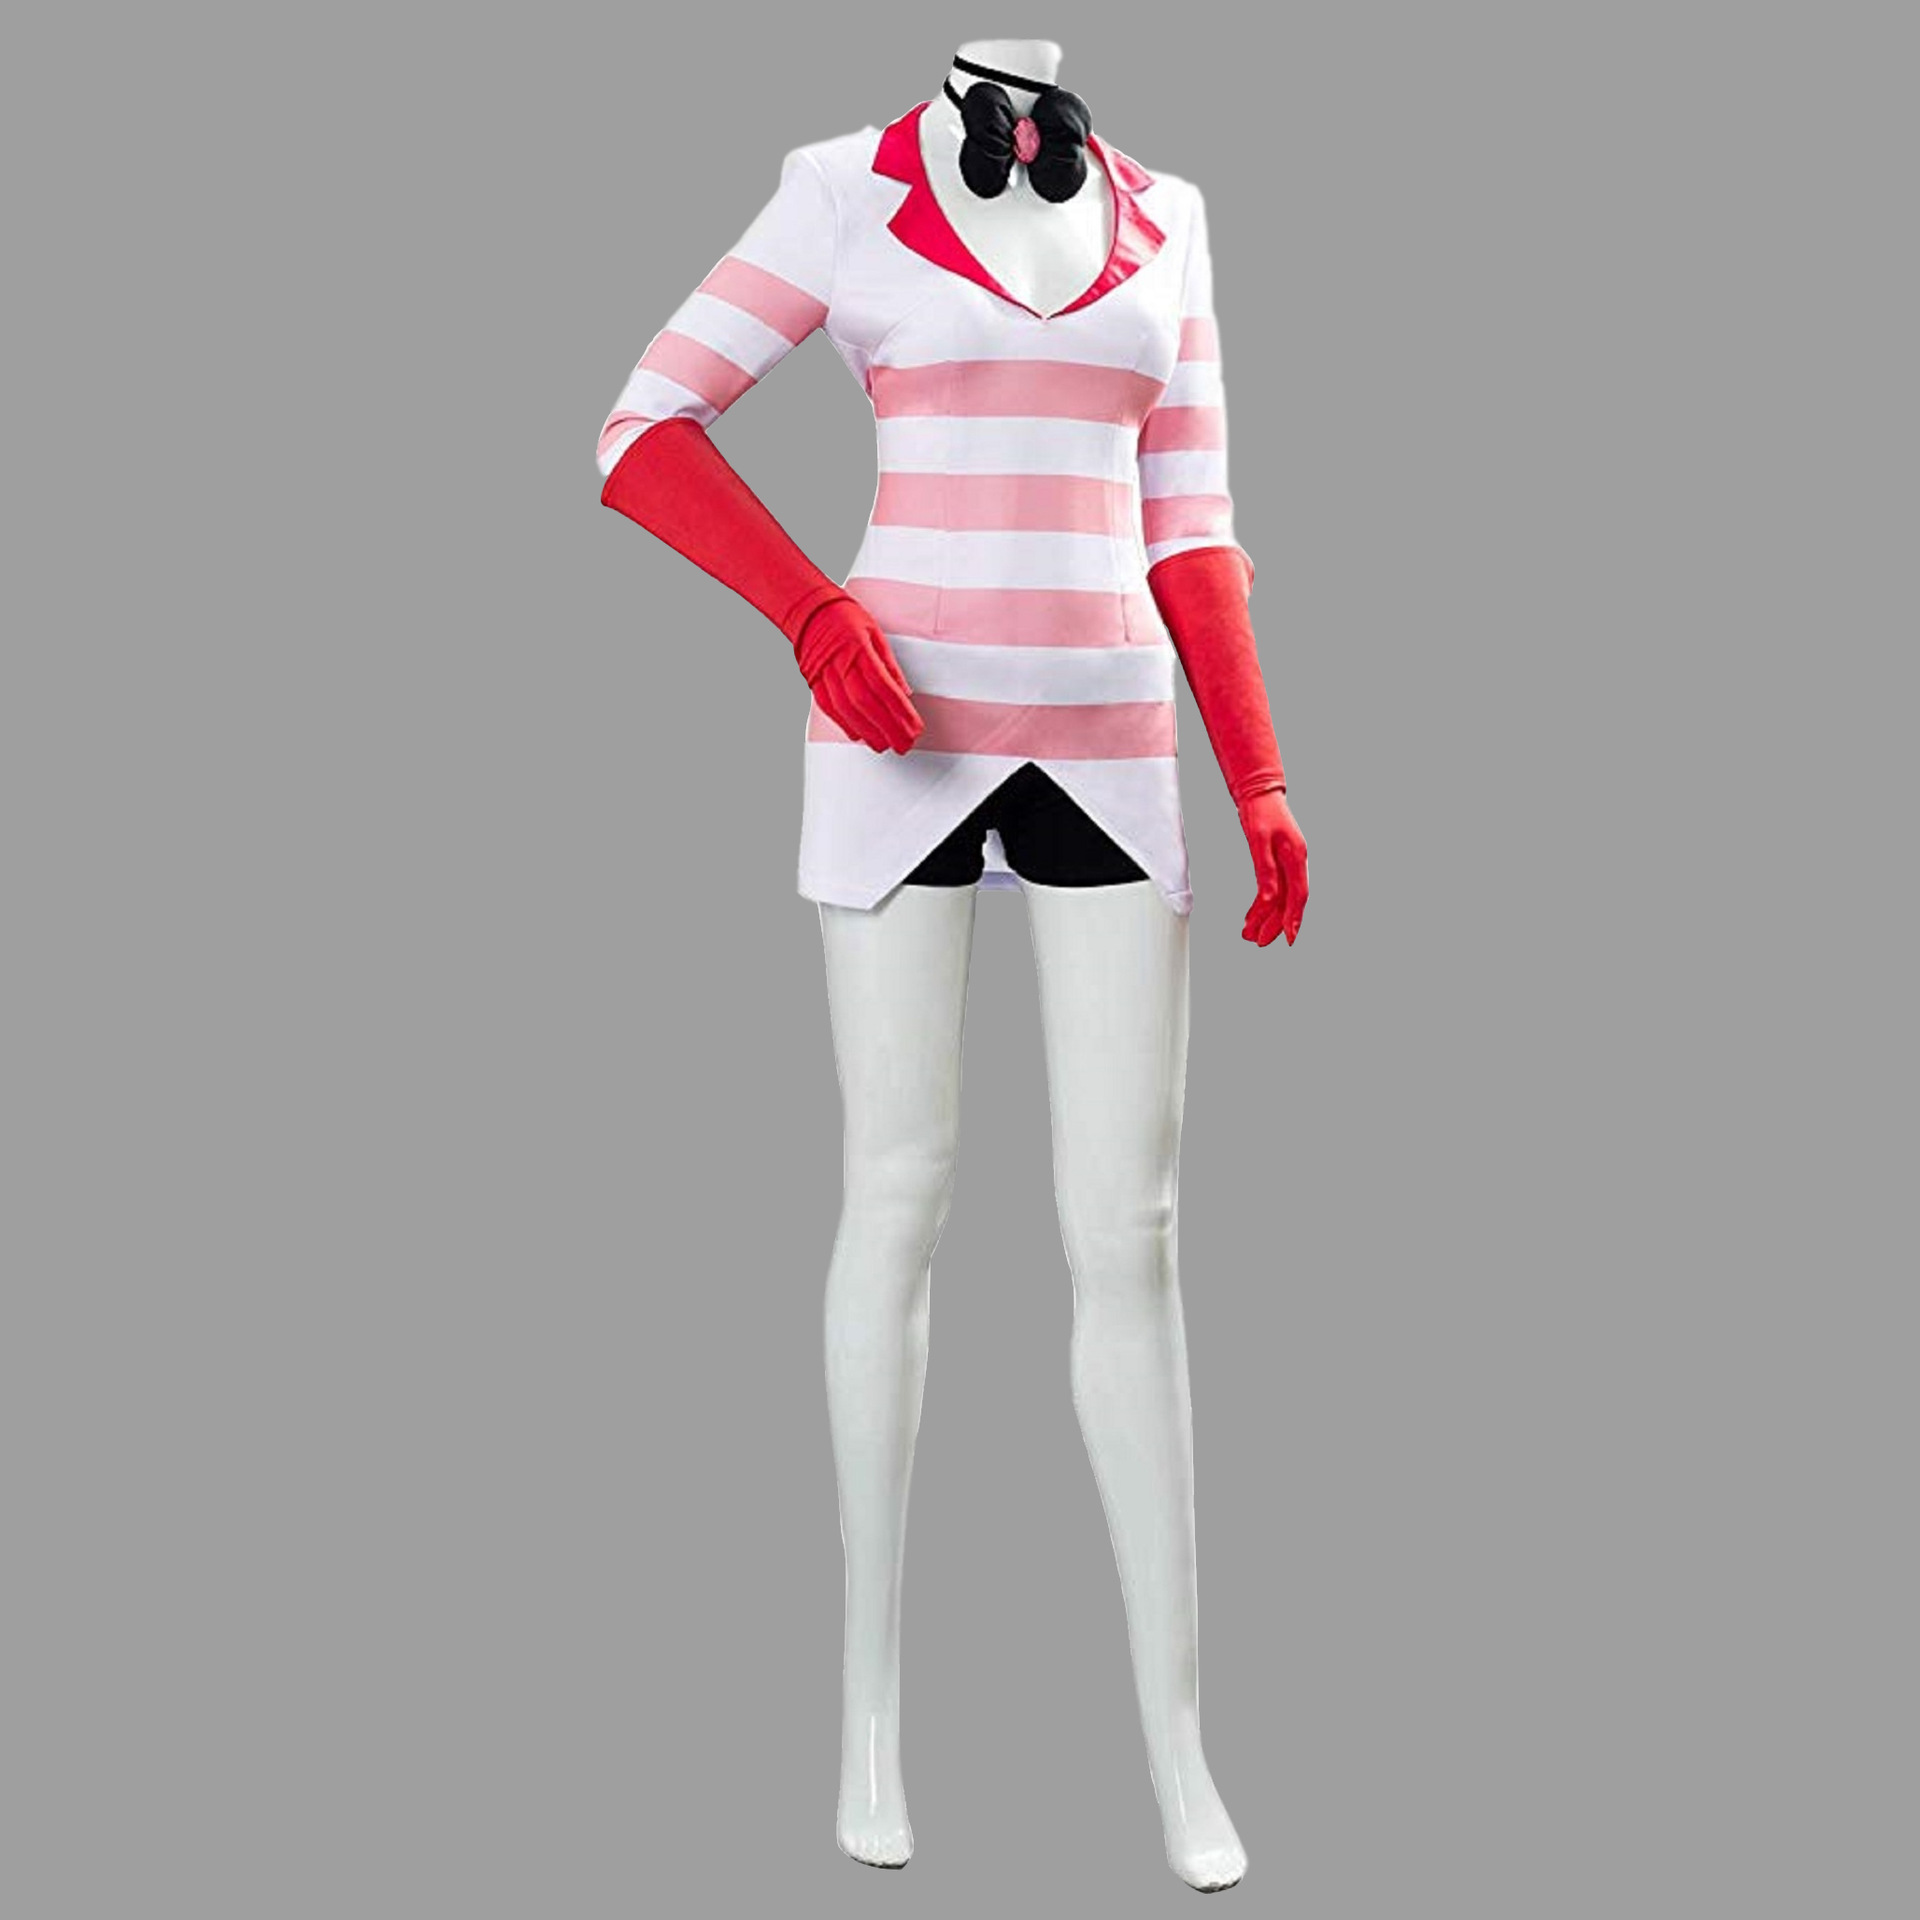 Anime Hotel Cosplay Costume Webcomic Dust Angel Uniform Women Girls Mardi Gras Carnival White Suit with Pink Stripes